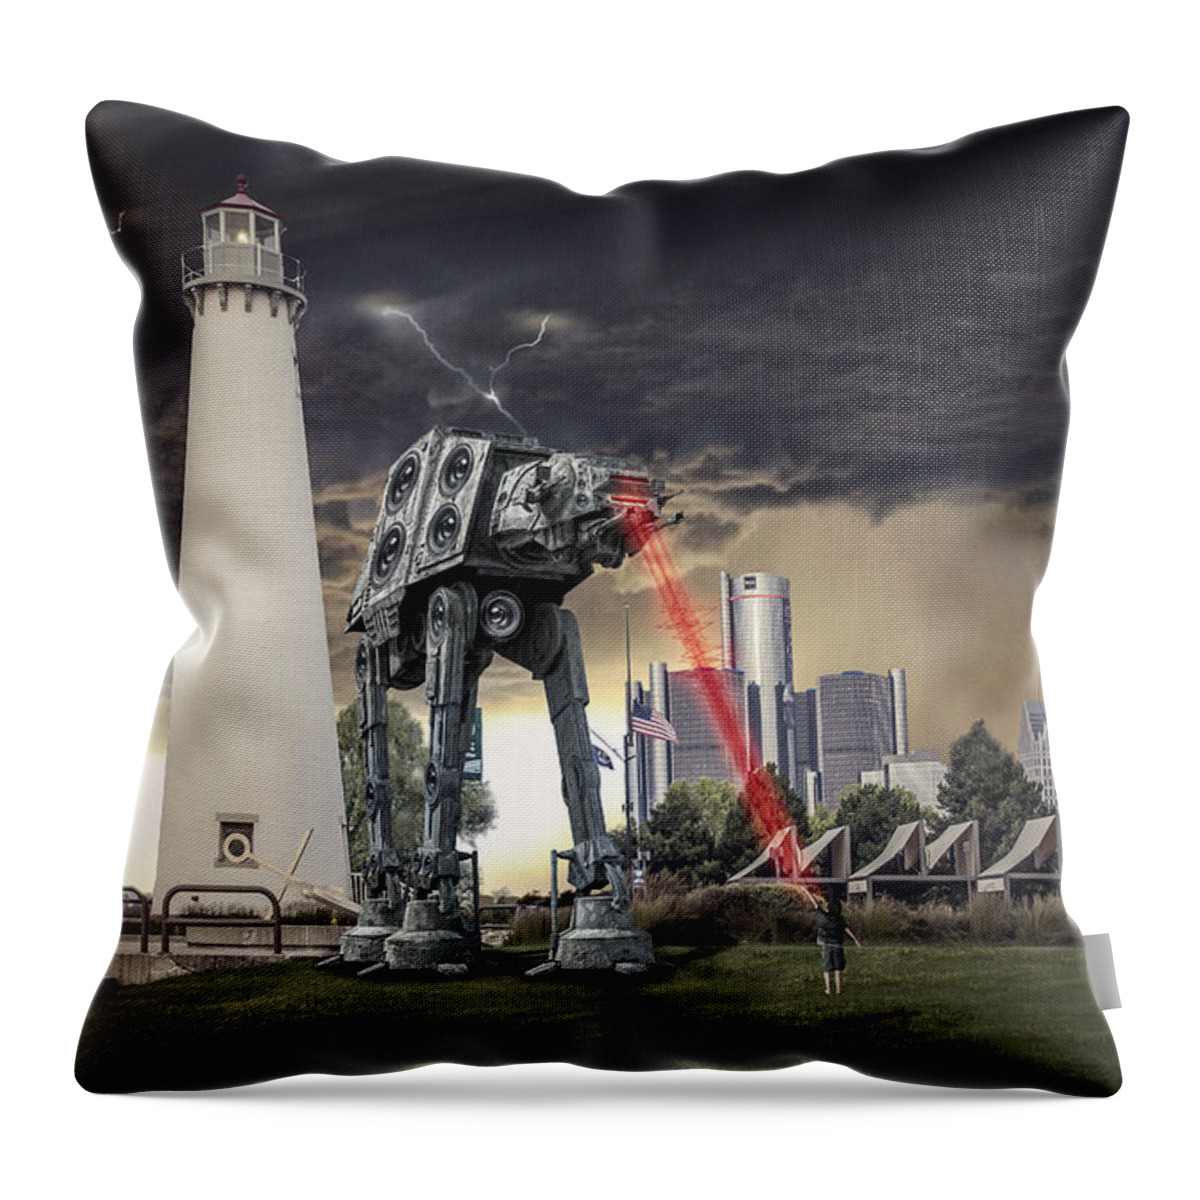 Star Wars Throw Pillow featuring the photograph Star Wars All Terrain Armored Transport by Nicholas Grunas